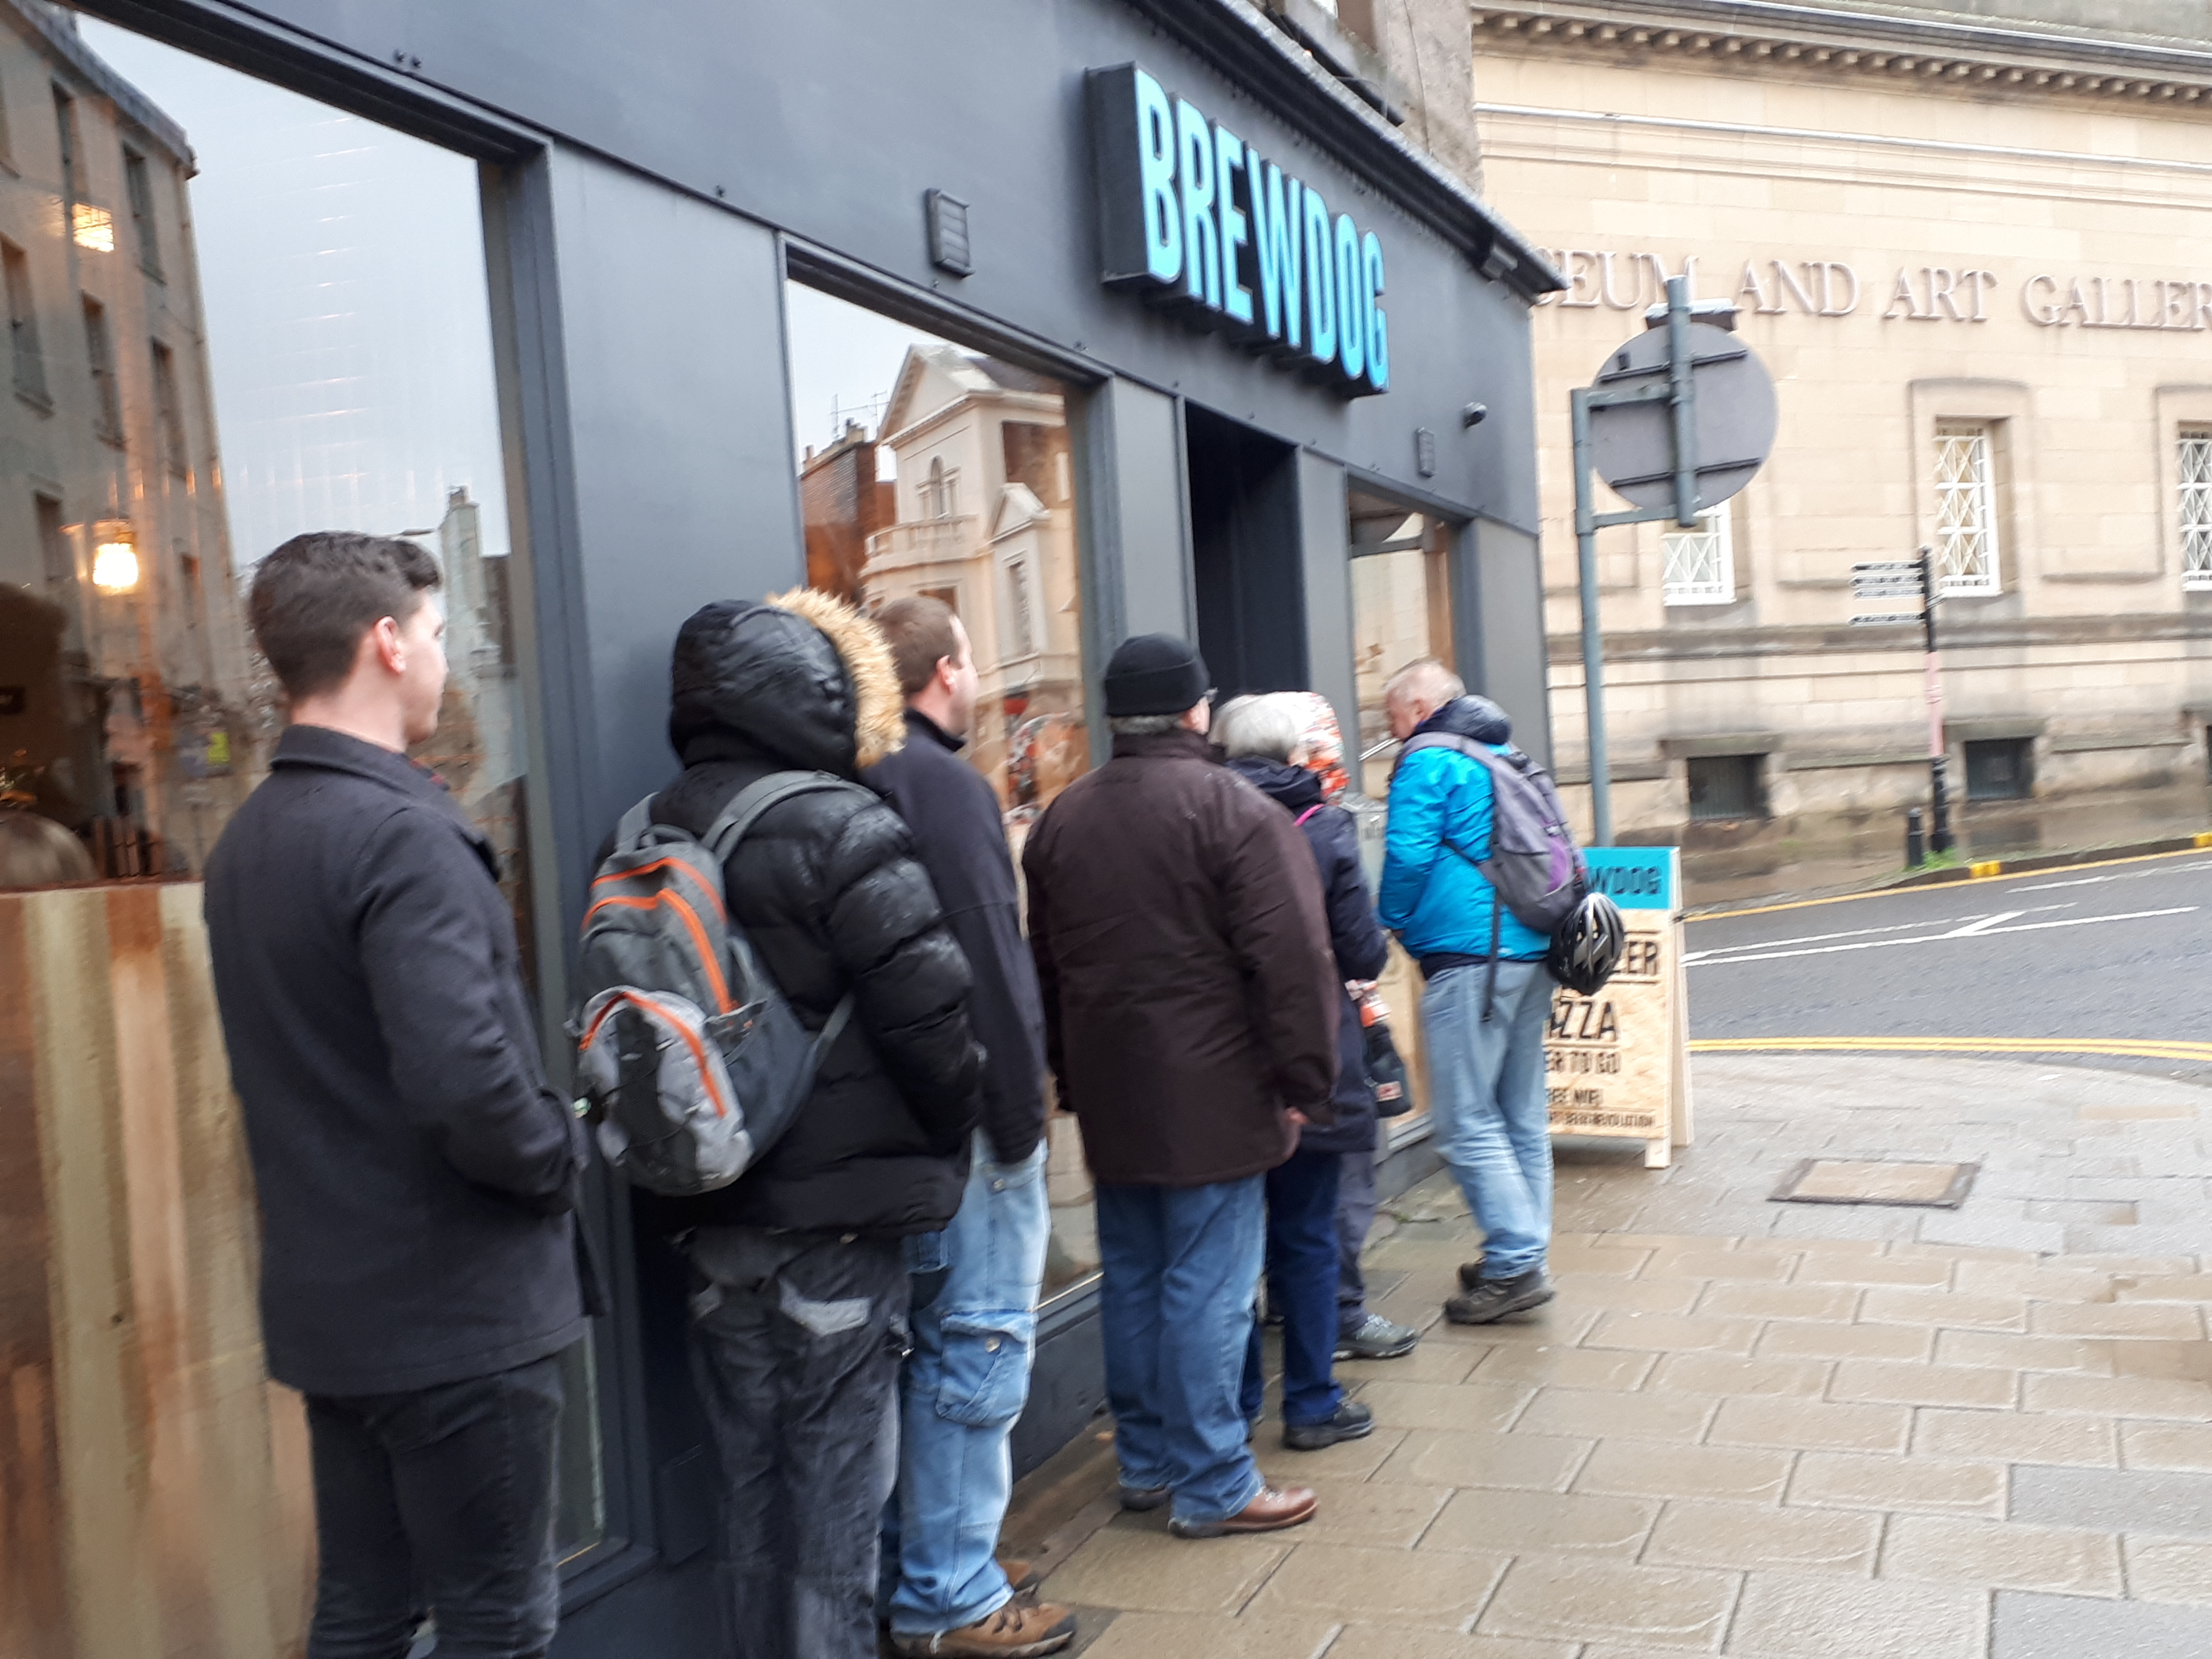 Beer fans queuing outside Brewdog an hour before opening.